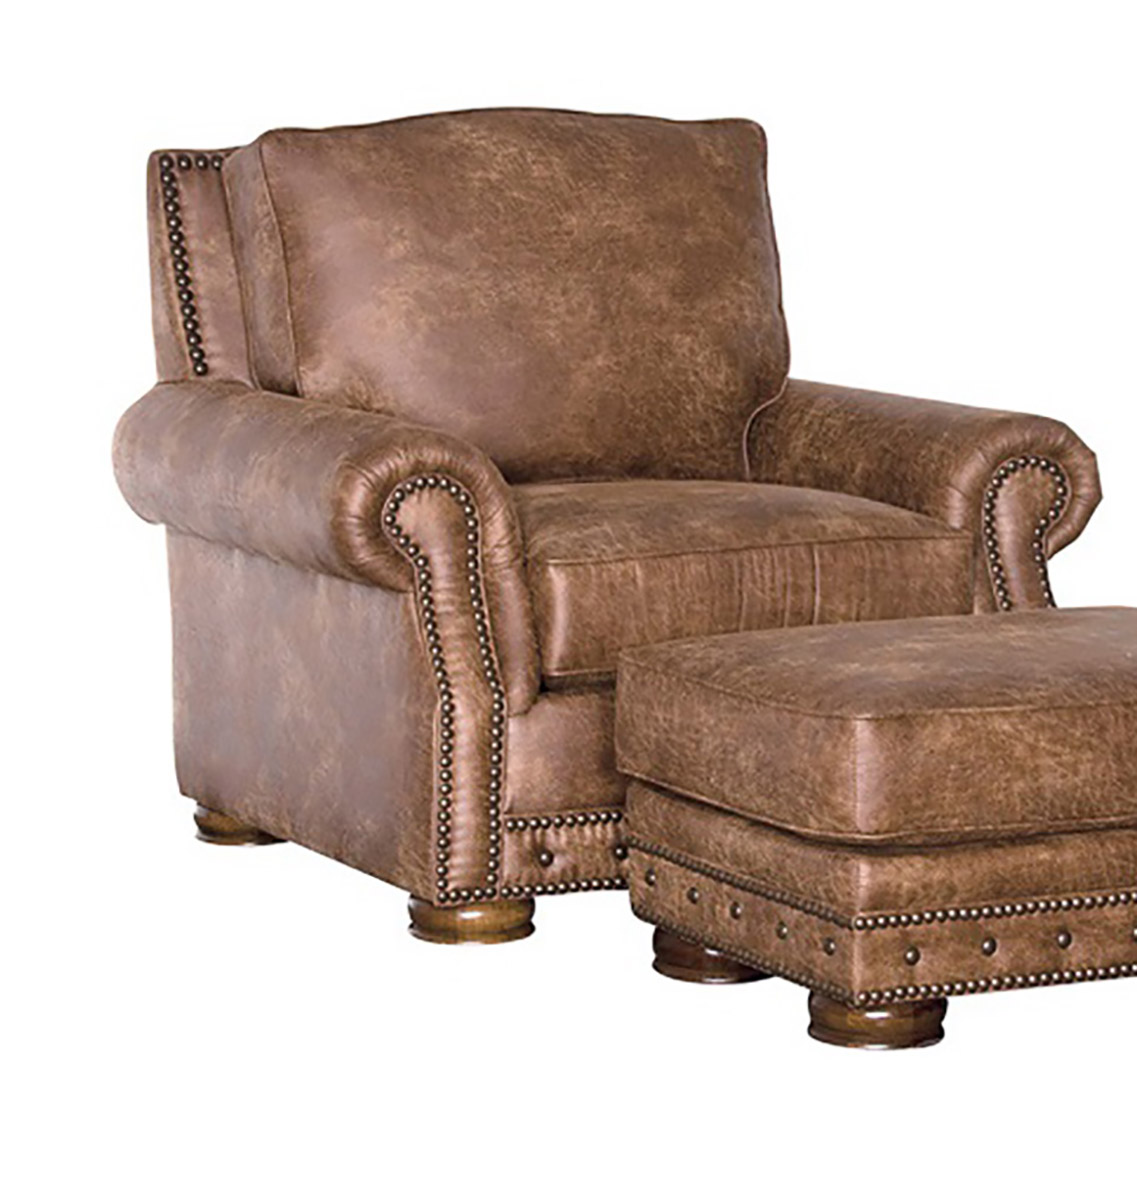 Chelsea Home Stoughton Chair - Brown